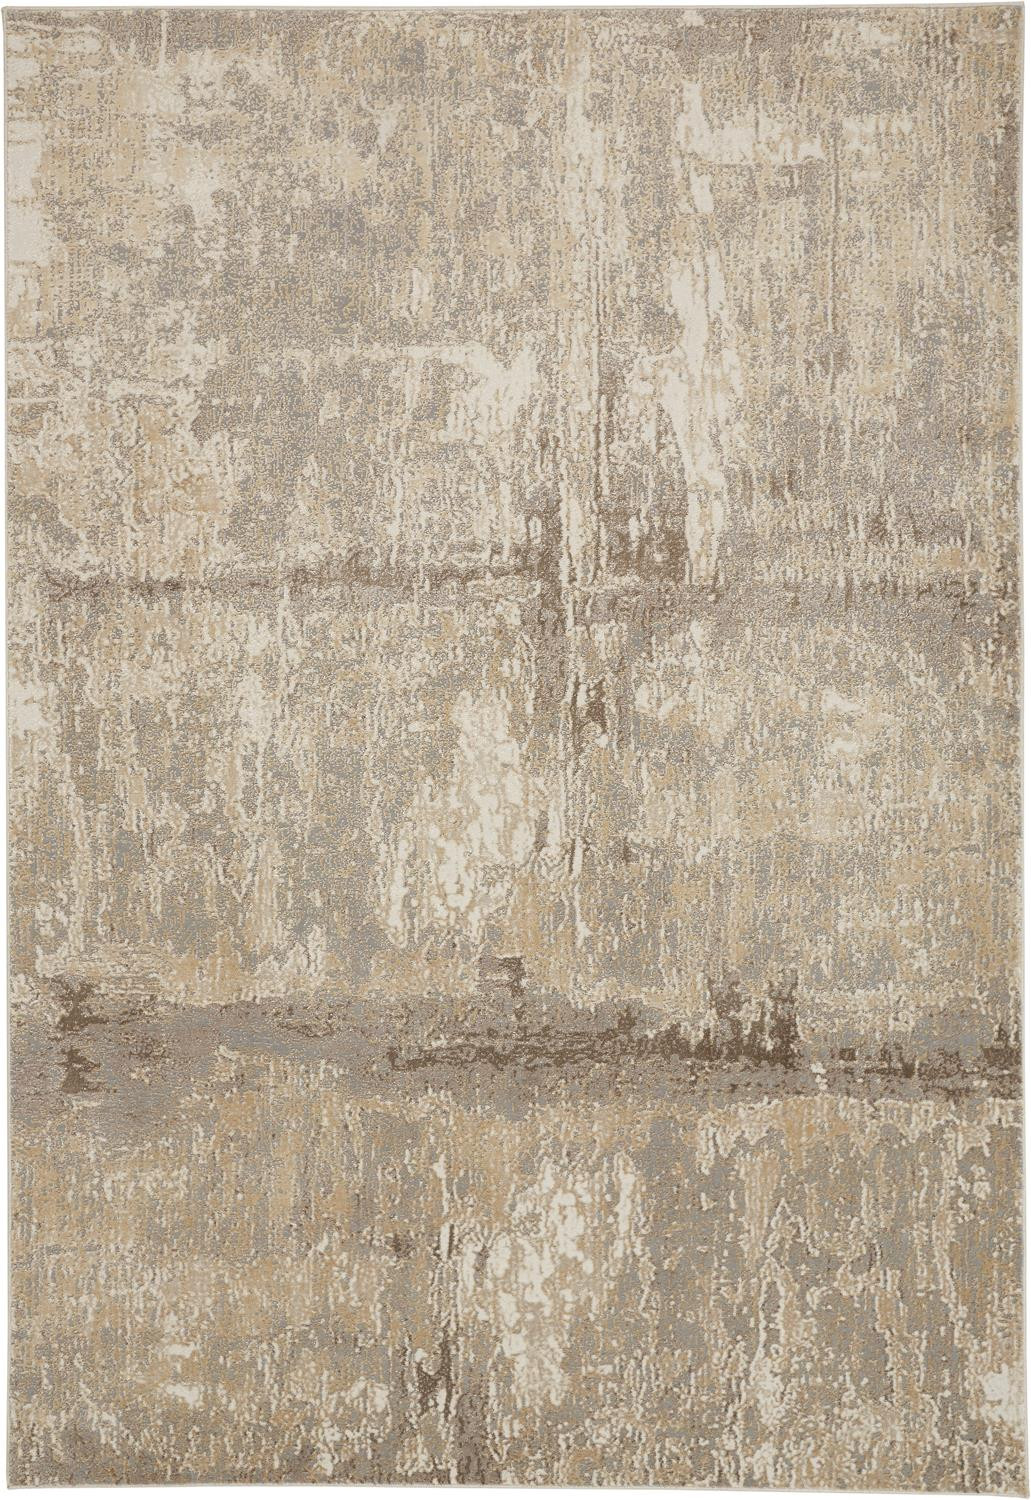 10' X 14' Tan Ivory And Brown Abstract Area Rug-514691-1